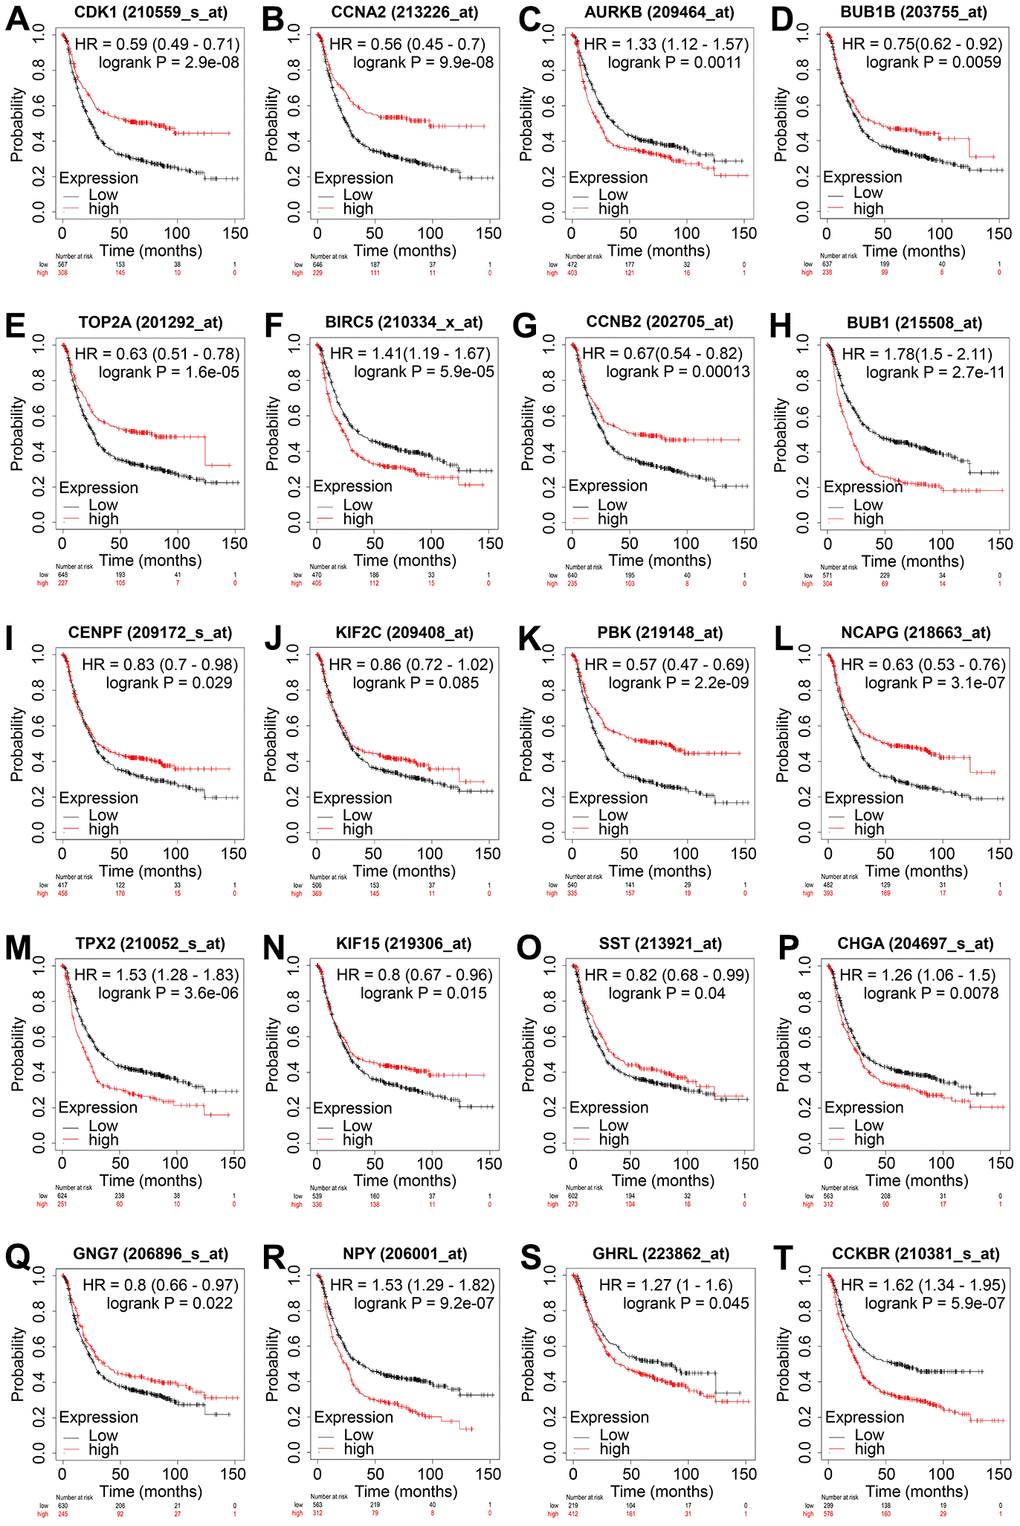 Overall survival analysis of the 20 hub genes in GC. Overall survival of patients with GC with low and high levels of CDK1 (A), CCNA2 (B), AURKB (C), BUB1B (D), TOP2A (E), BIRC5 (F), CCNB2 (G), BUB1 (H), CENPF (I), KIF2C (J), PBK (K), NCAPG (L), TPX2 (M), KIF15 (N), SST (O), CHGA (P), GNG7 (Q), NPY (R), GHRL (S), and CCKBR (T) are displayed using Kaplan–Meier curves. Log-rank P 